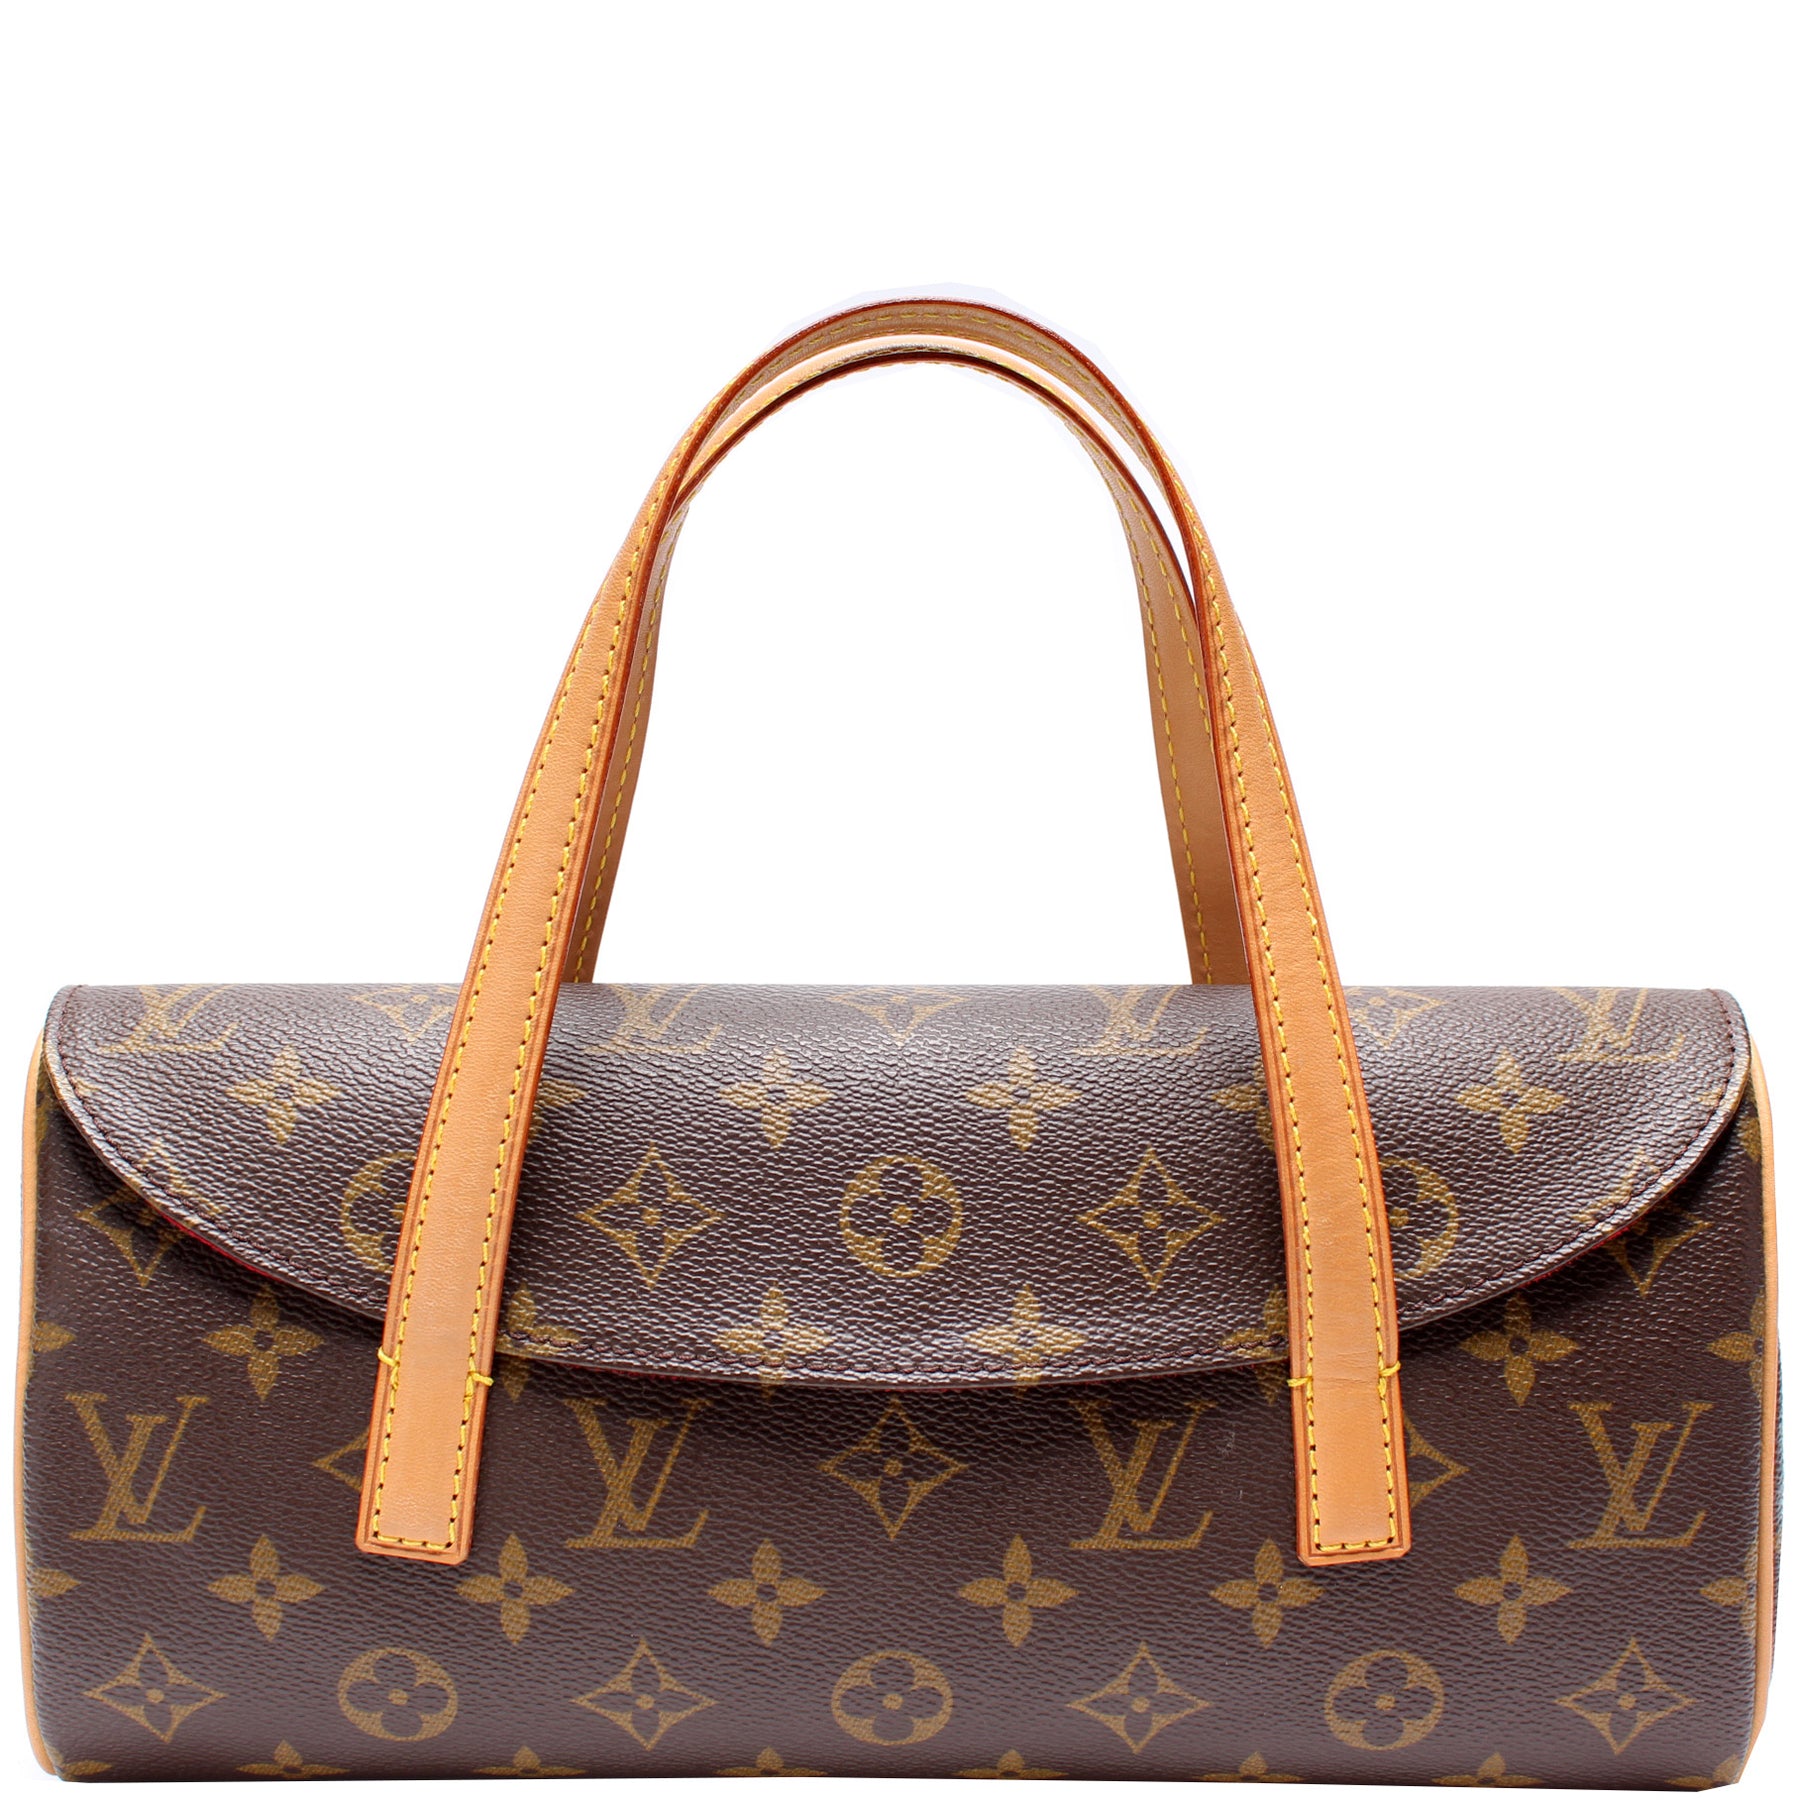 Louis Vuitton - Authenticated Sonatine Handbag - Cloth Brown for Women, Very Good Condition